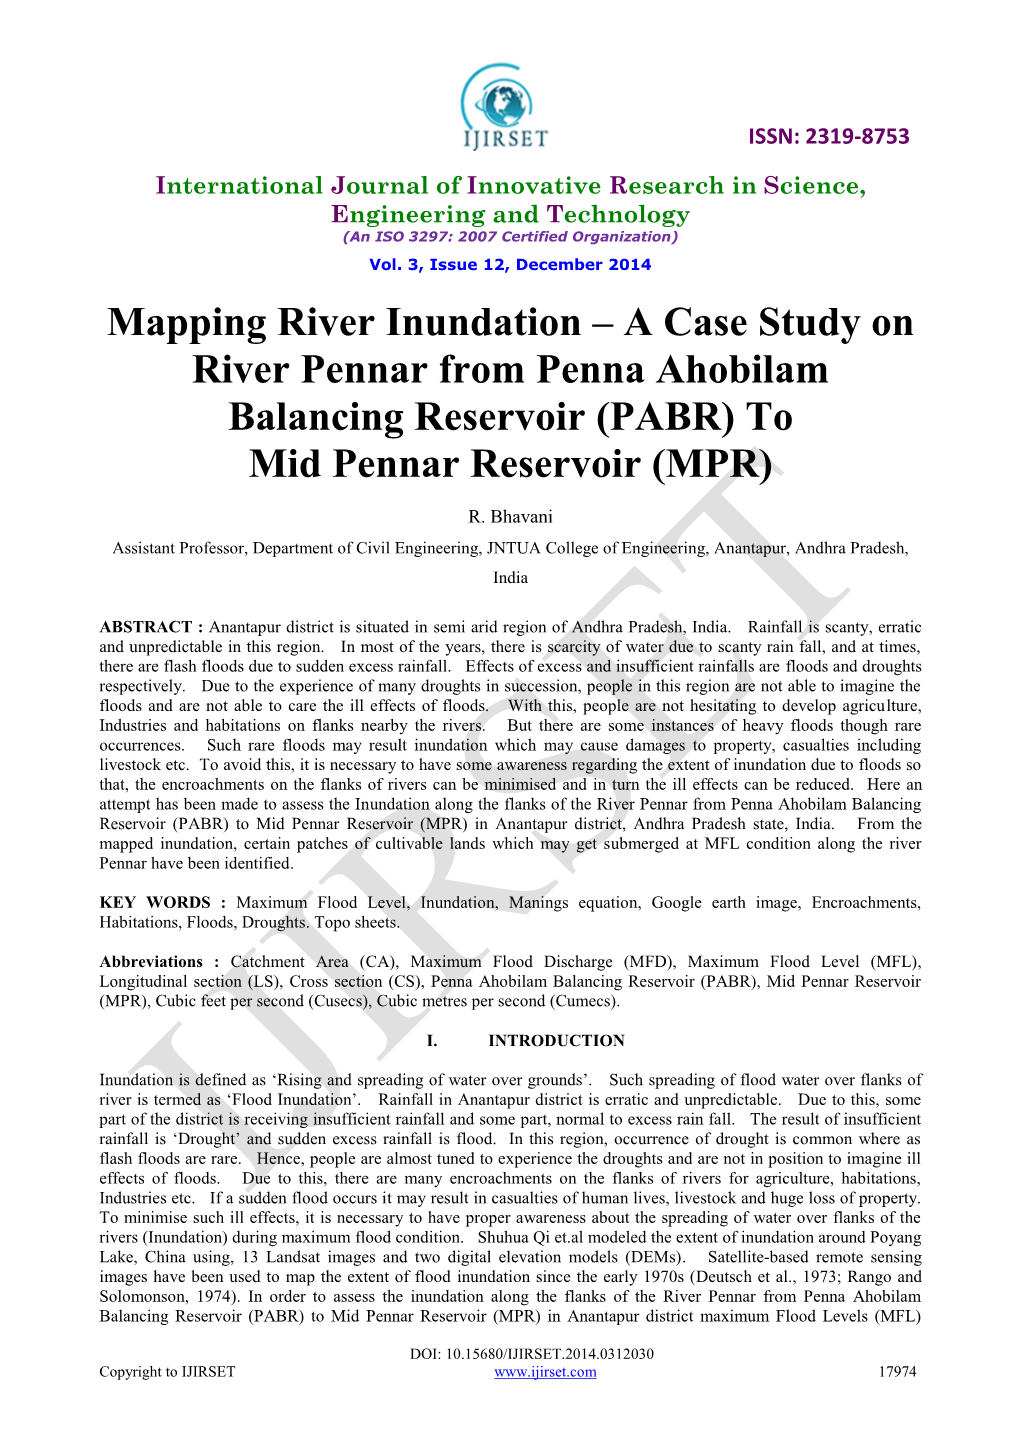 Mapping River Inundation – a Case Study on River Pennar from Penna Ahobilam Balancing Reservoir (PABR) to Mid Pennar Reservoir (MPR)